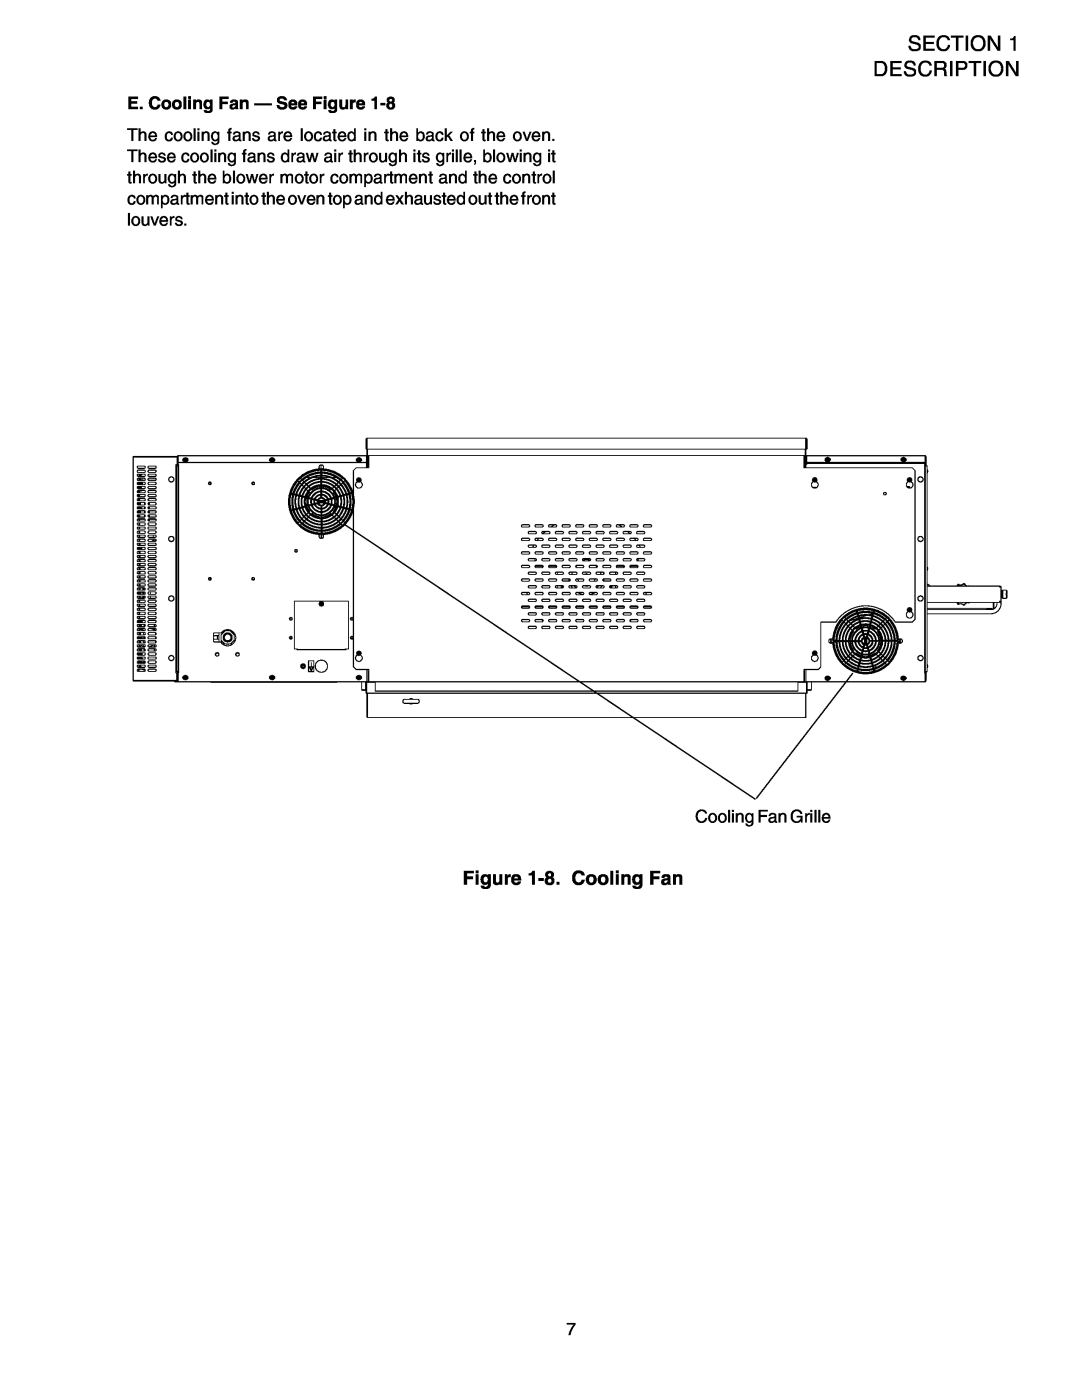 Middleby Marshall PS540 installation manual Section Description, 8.Cooling Fan, E. Cooling Fan — See Figure 